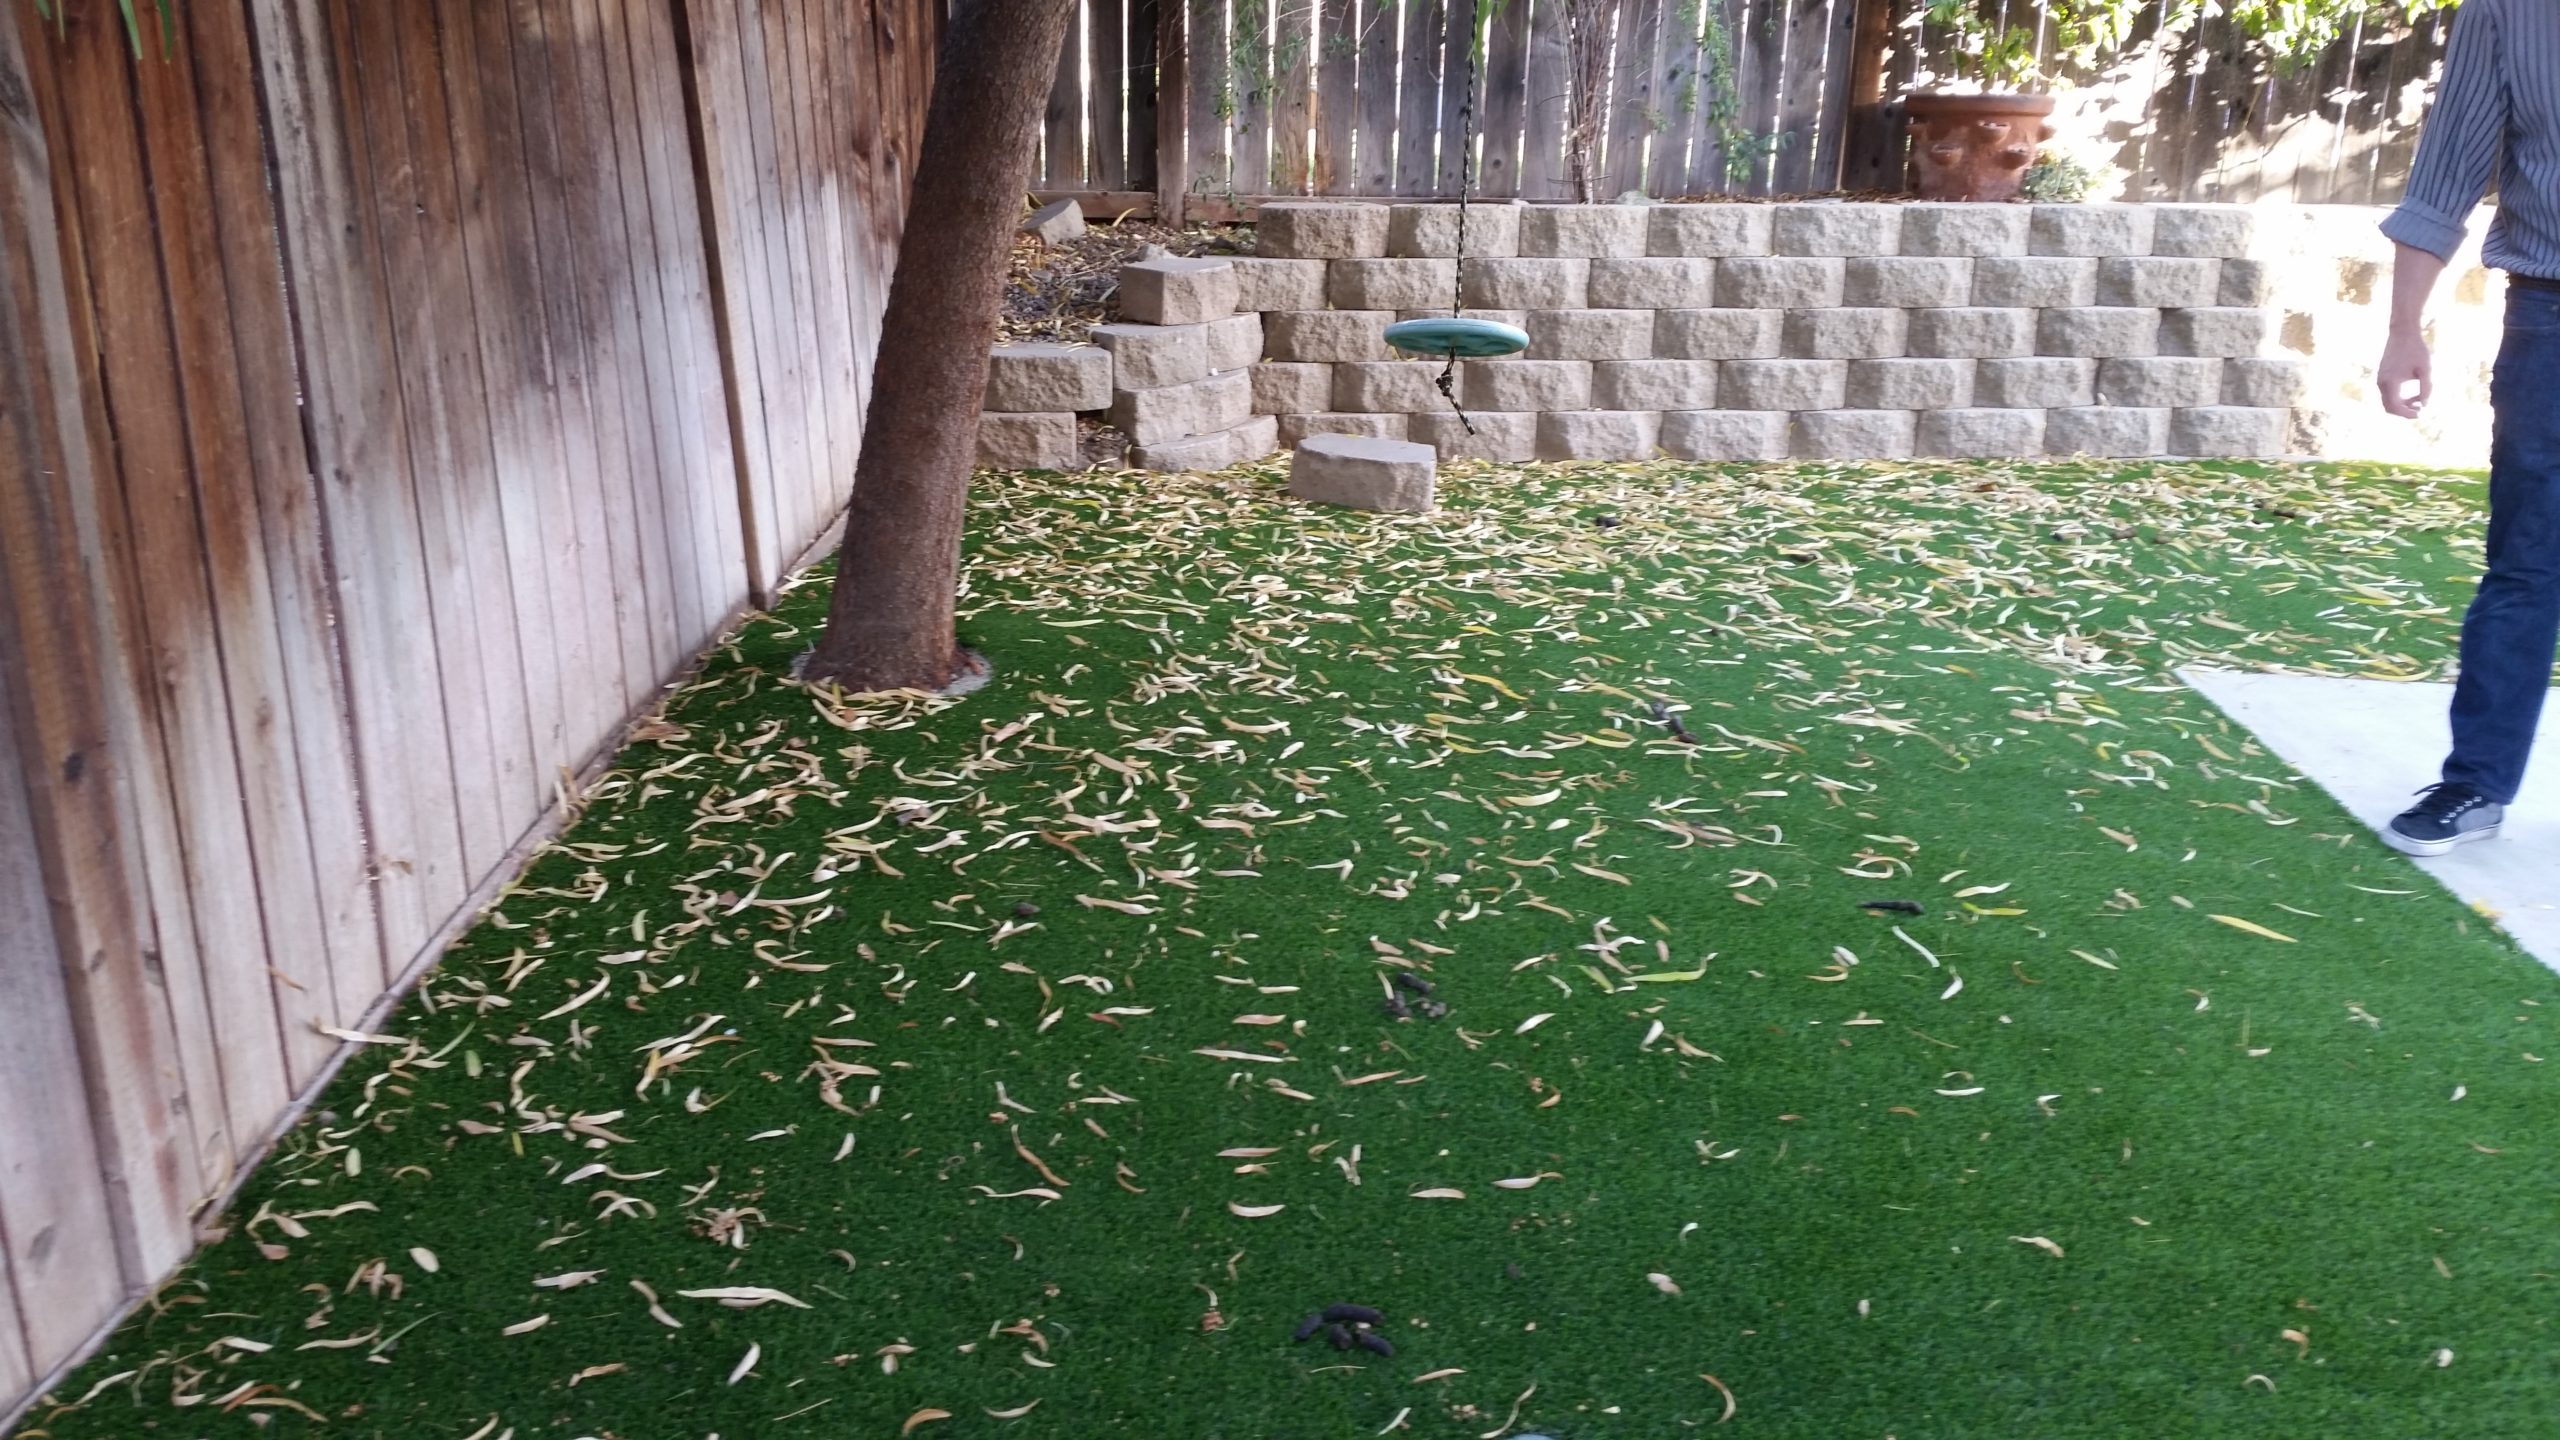 Leaves on Artificial Turf